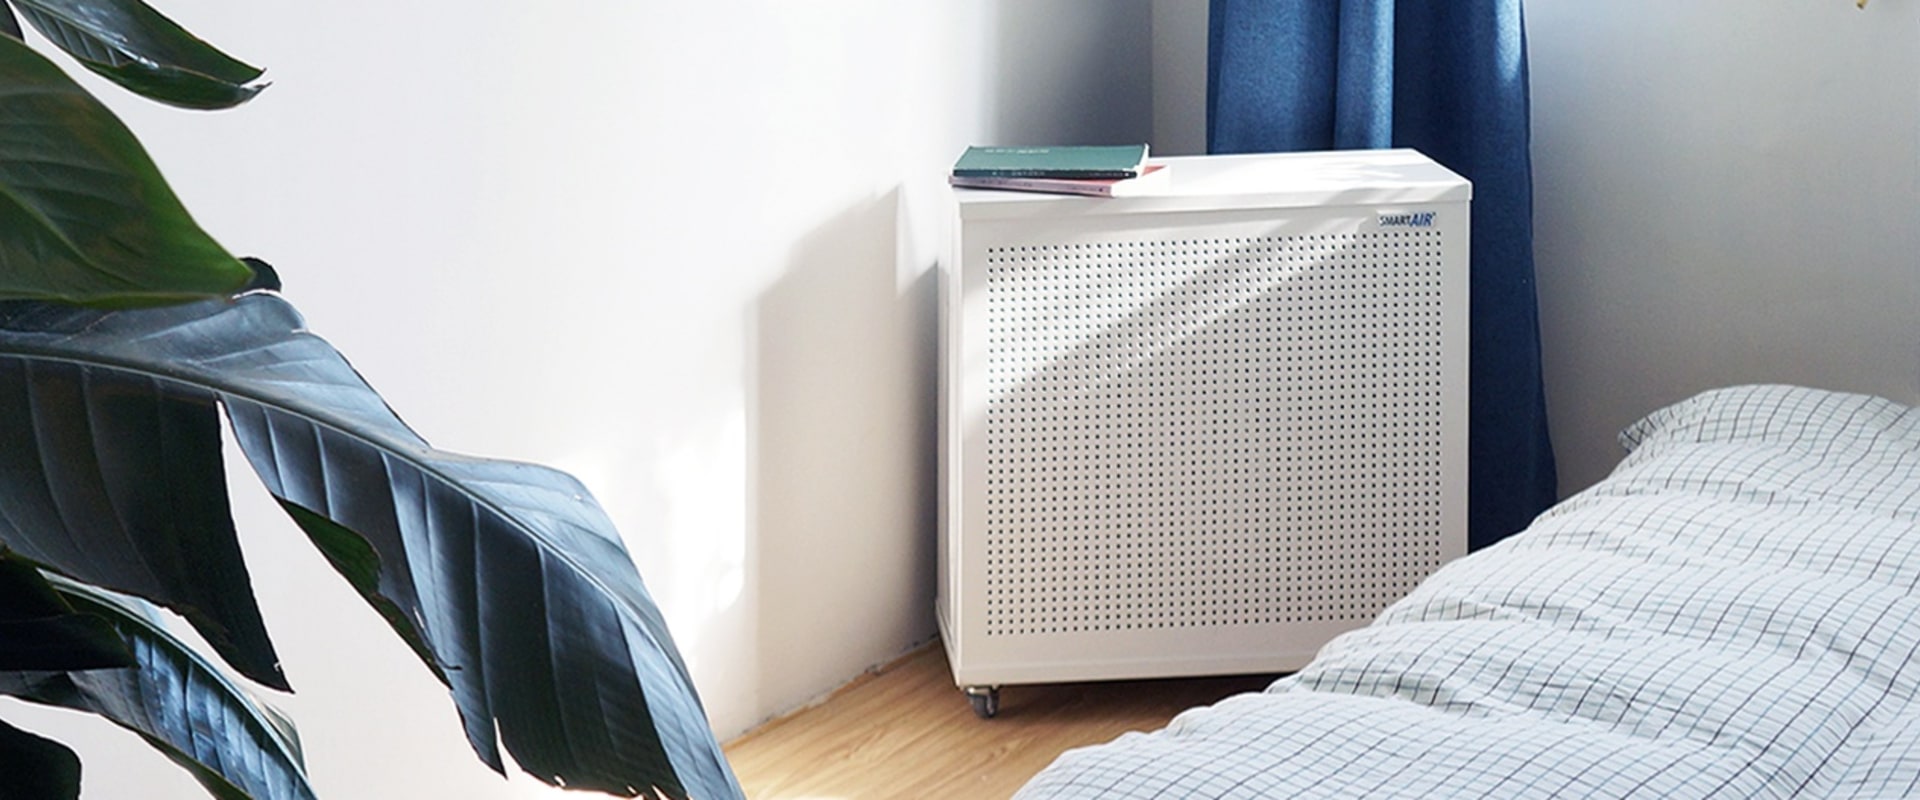 The Benefits of Sleeping with an Air Purifier: An Expert's Perspective